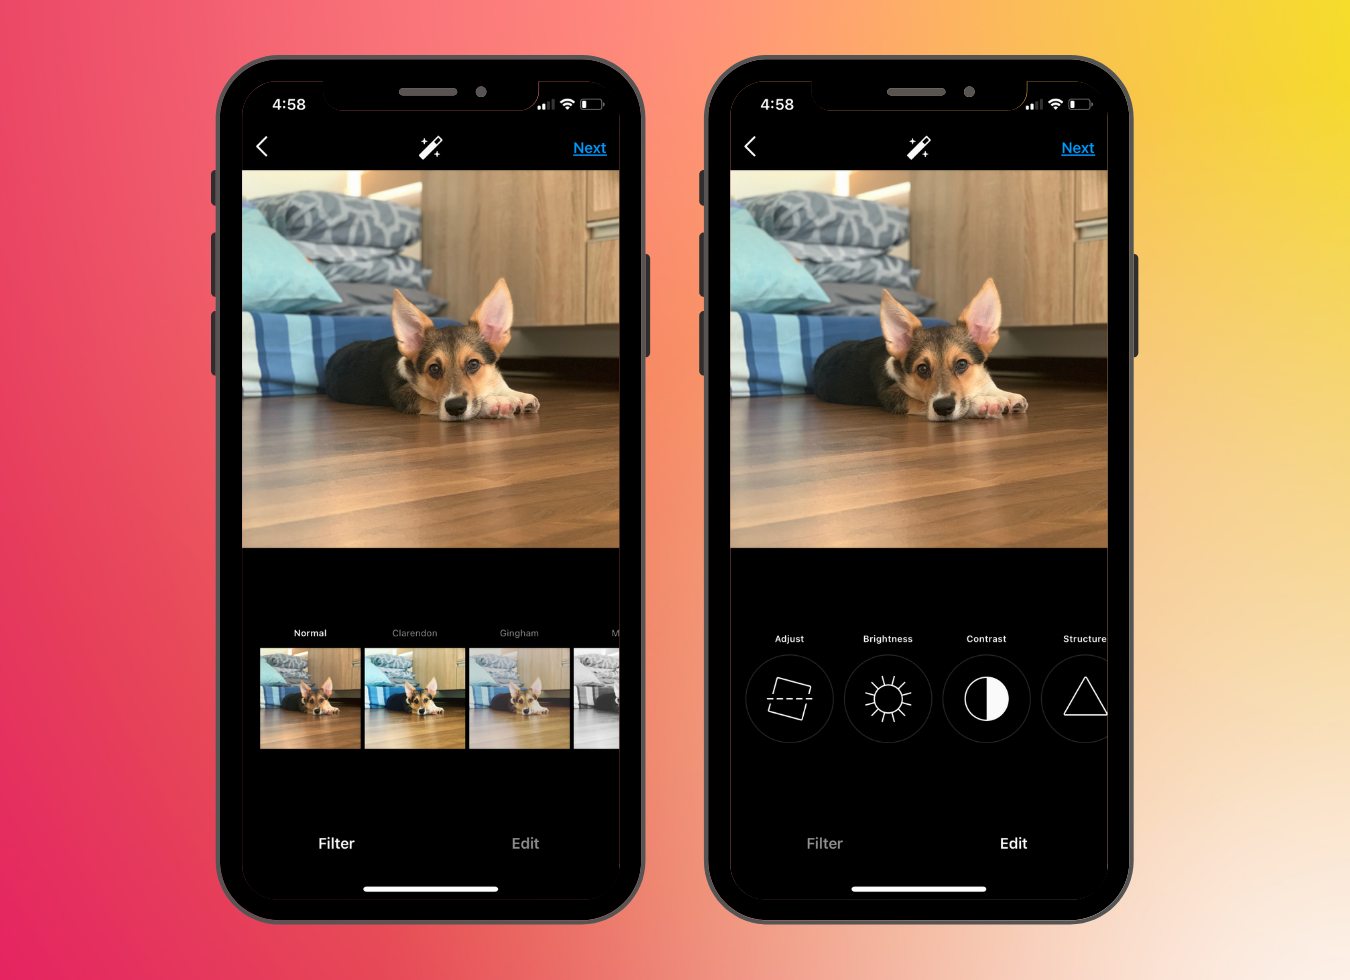 A corgi with big pointy ears lying on a wooden floor in the photo editor on the Instagram mobile app, and the Filter and Edit options below it. 